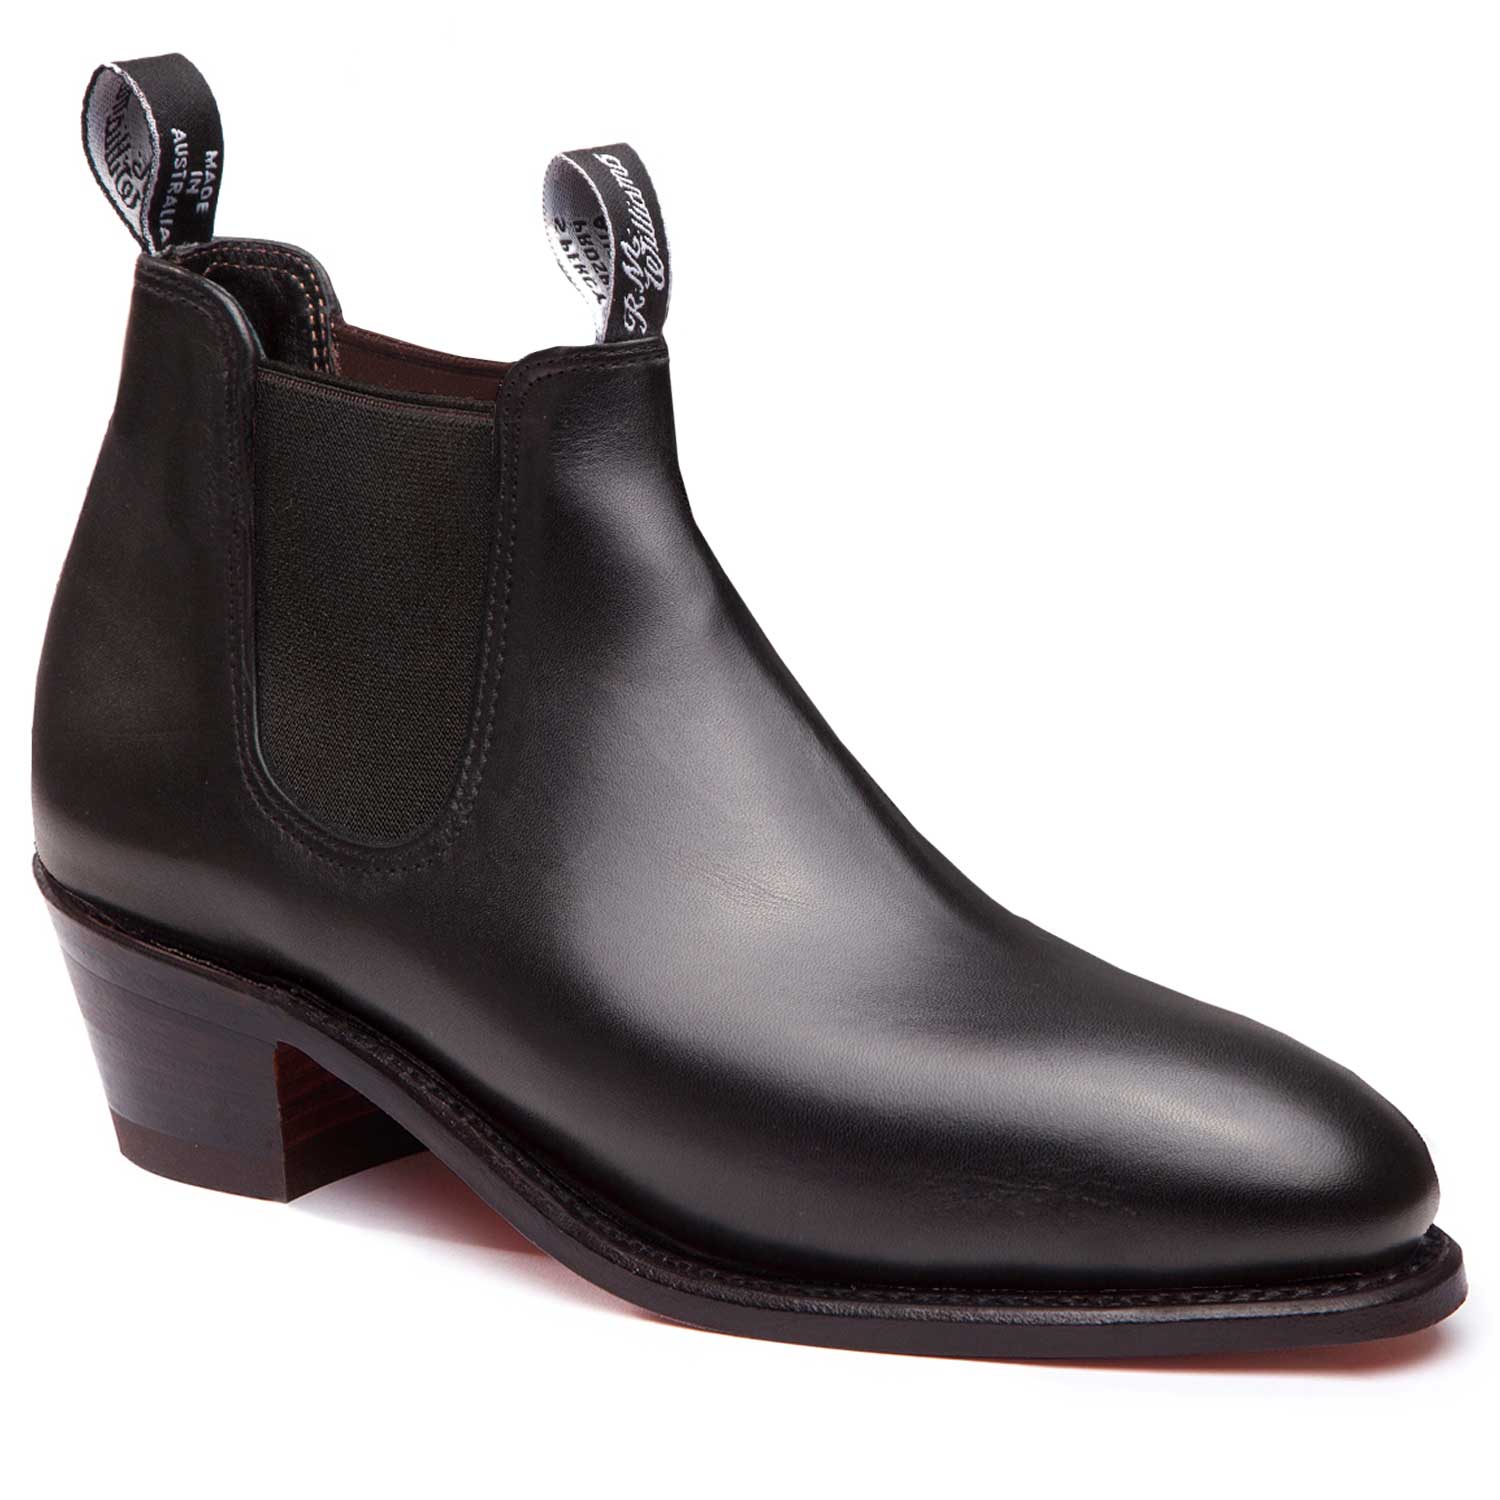 RM WILLIAMS Boots - Ladies Adelaide with Cuban Heel - Black